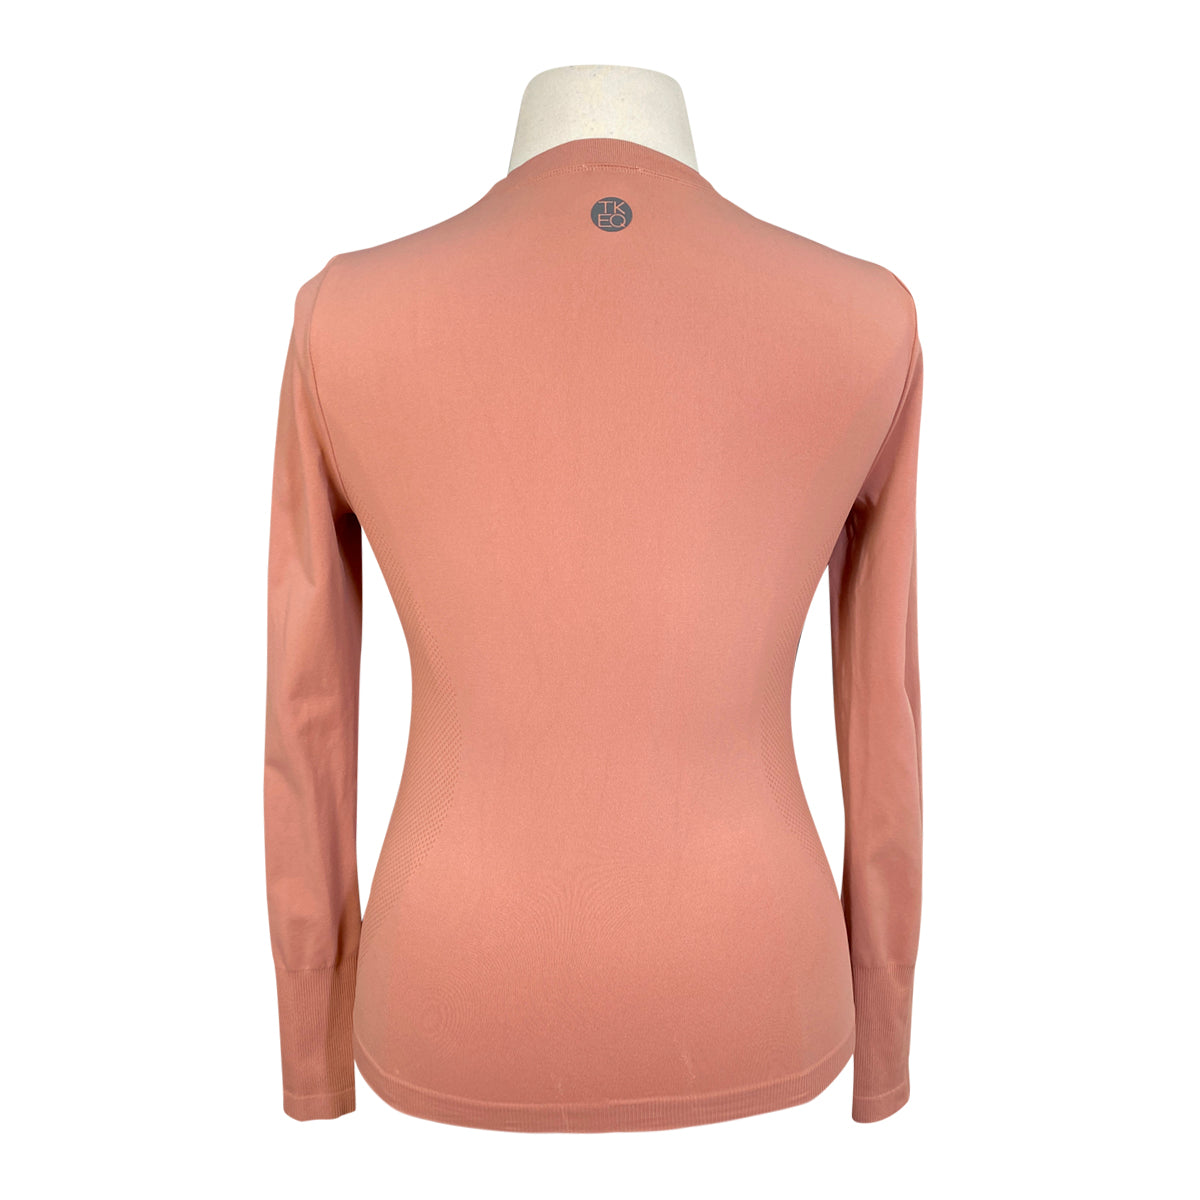 TKEQ Long Sleeve Compression Shirt in Dusty Rose